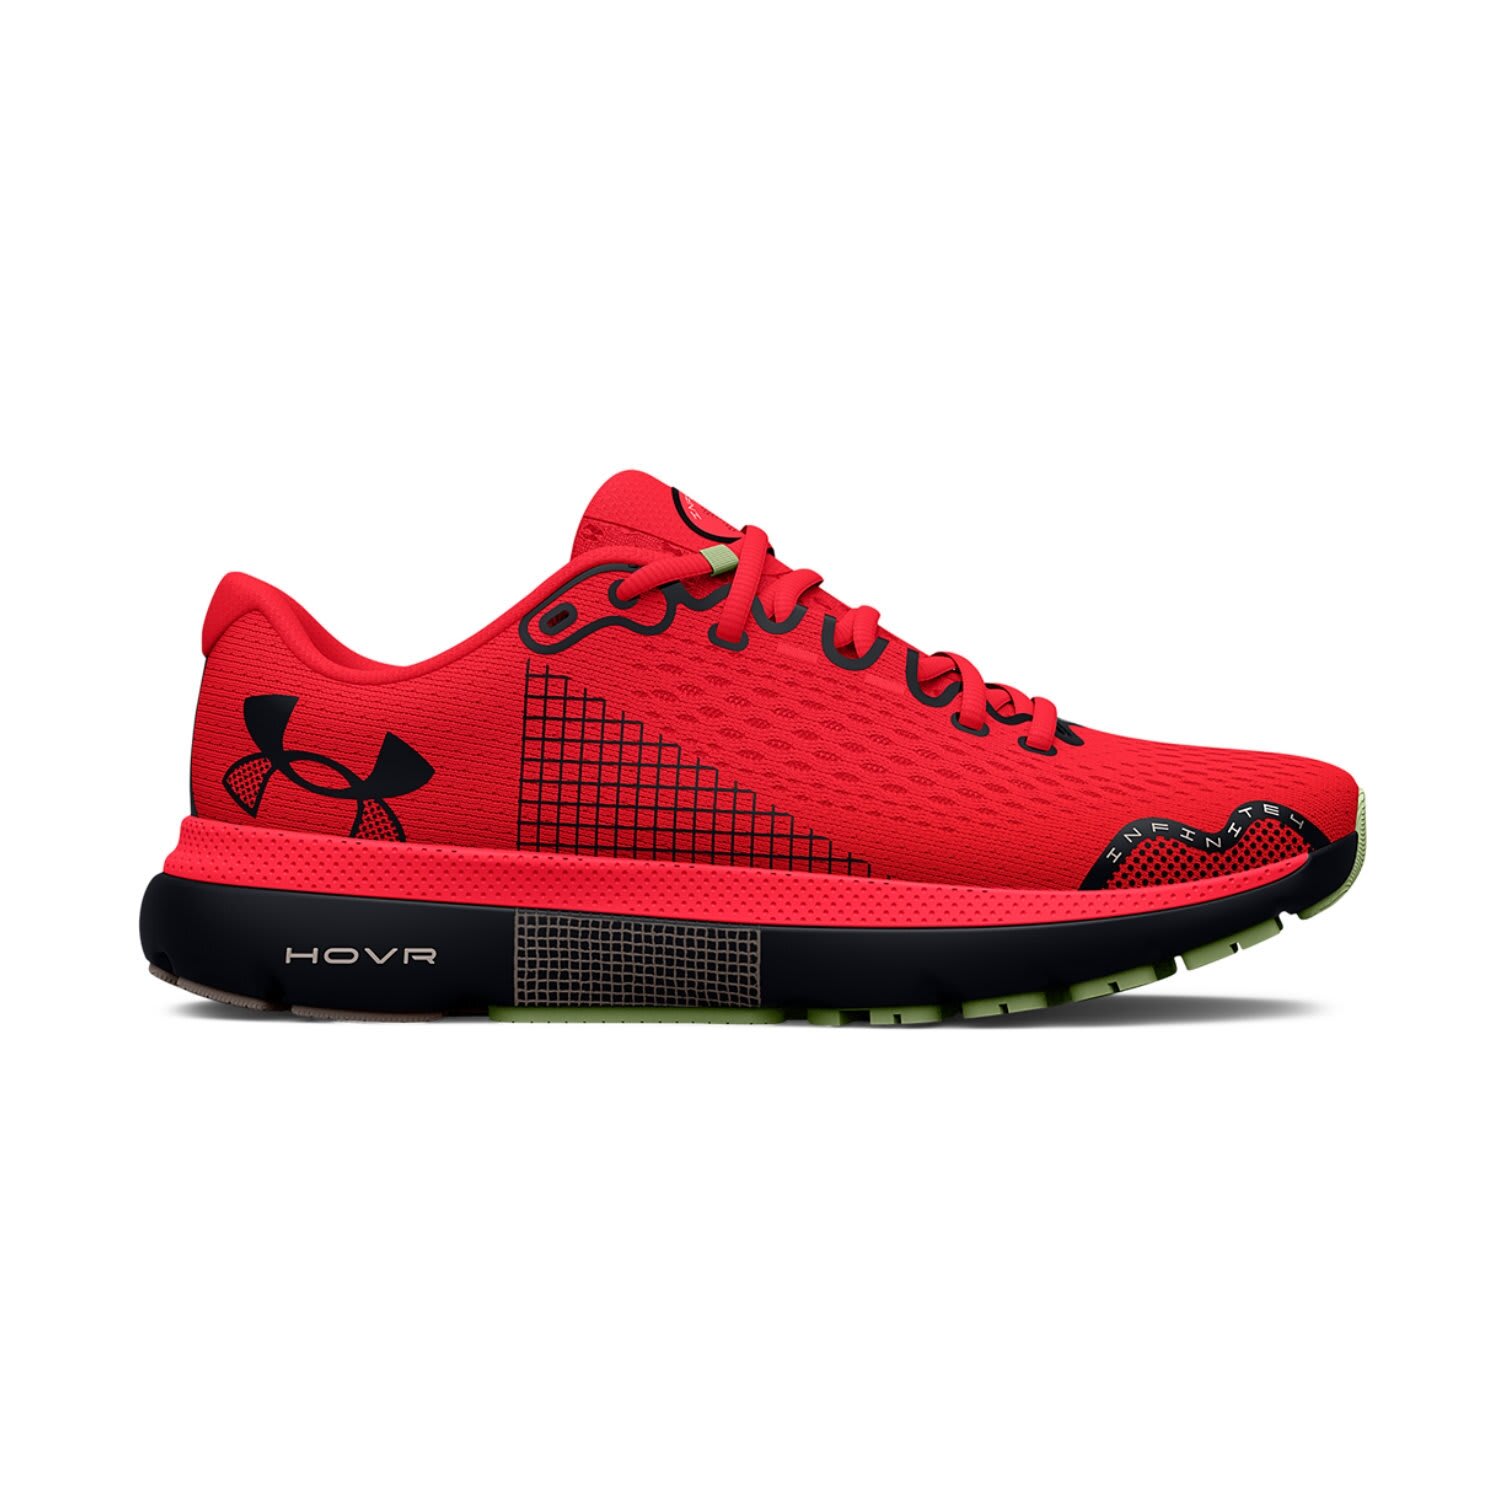 Under Armour Men's Hovr Infinite 4 Road Running Shoes | by Under Armour |  Price: R 2 899,9 | PLU 1166323 | Sportsmans Warehouse